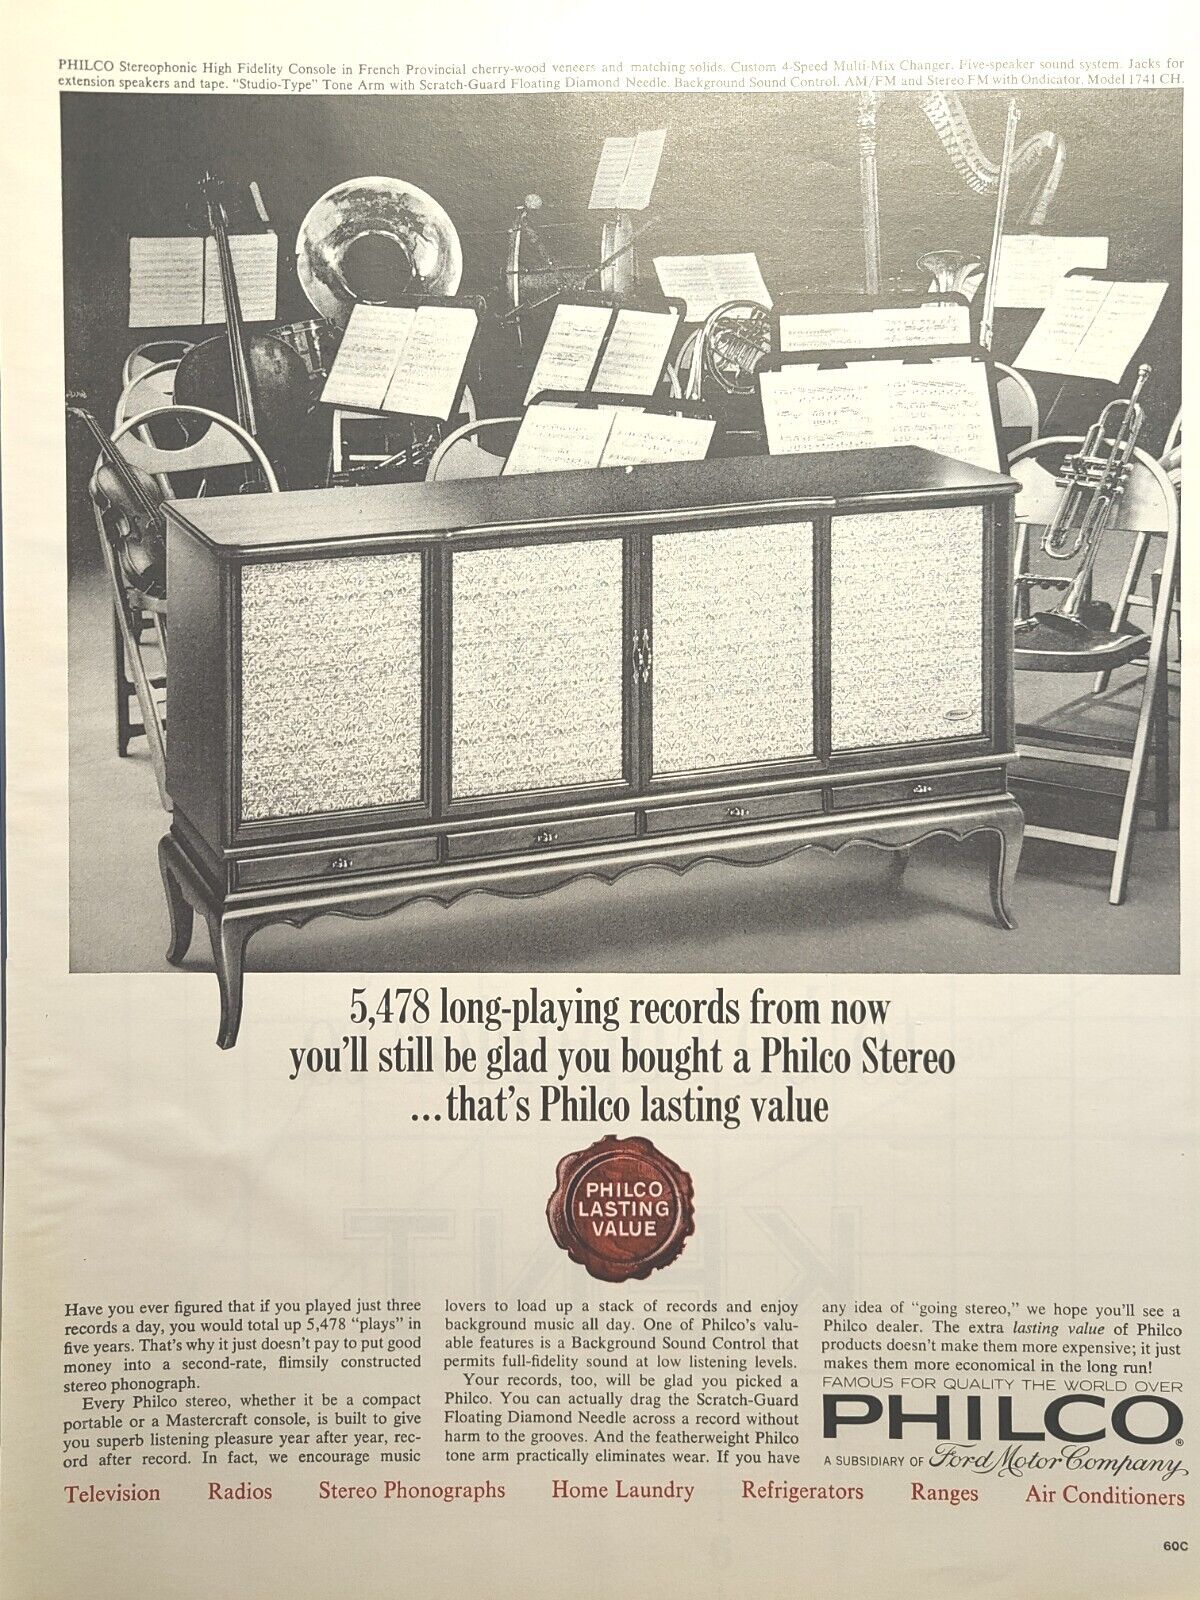 Philco Stereophonic High Fidelity Console French Cherry Vintage Print Ad 1964